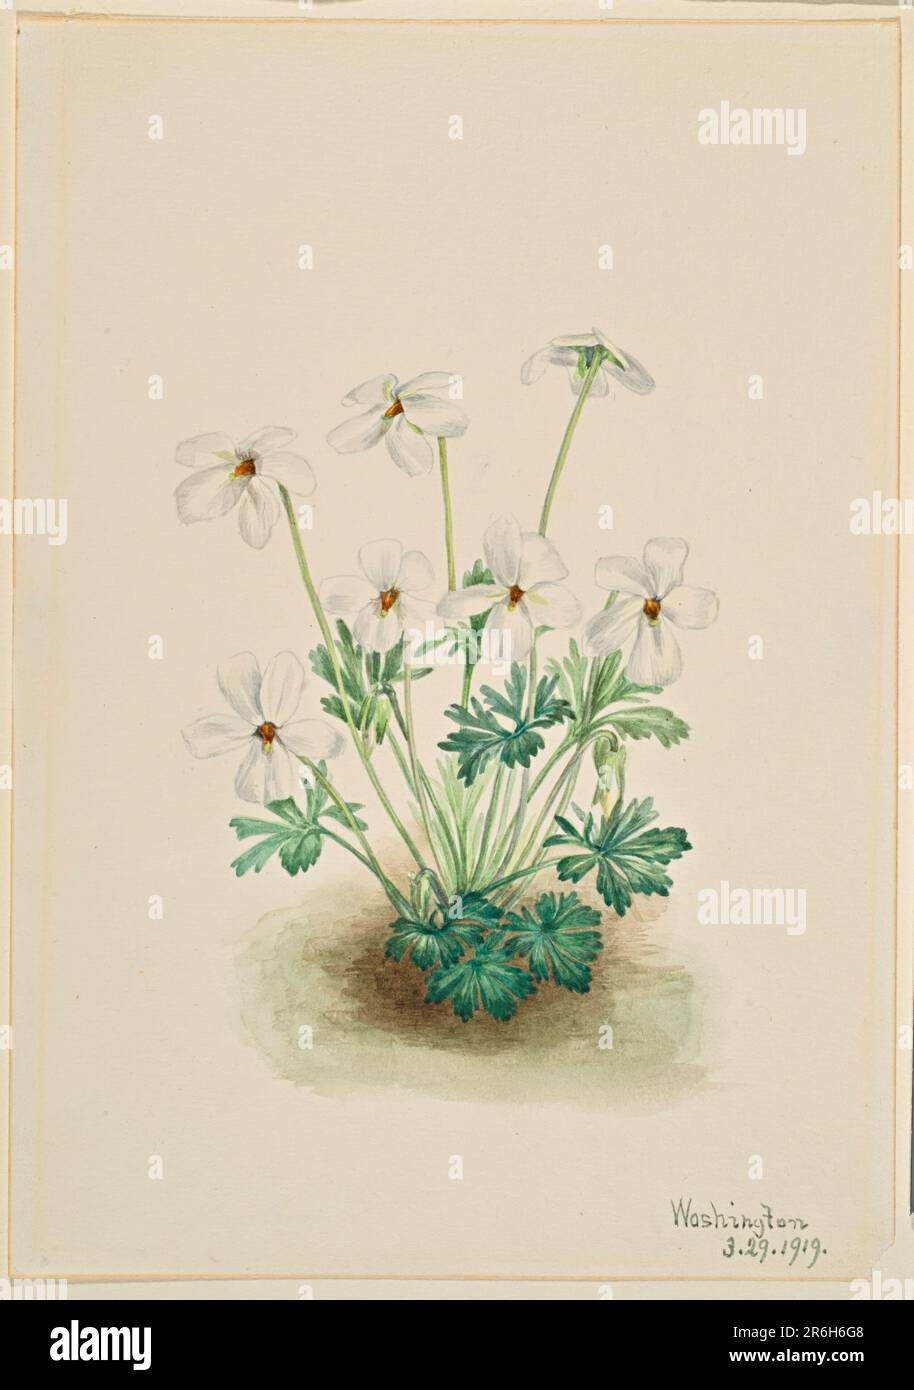 Pansy Violet (Viola pedata). Date: 1919. Watercolor on paper. Museum: Smithsonian American Art Museum. Stock Photo